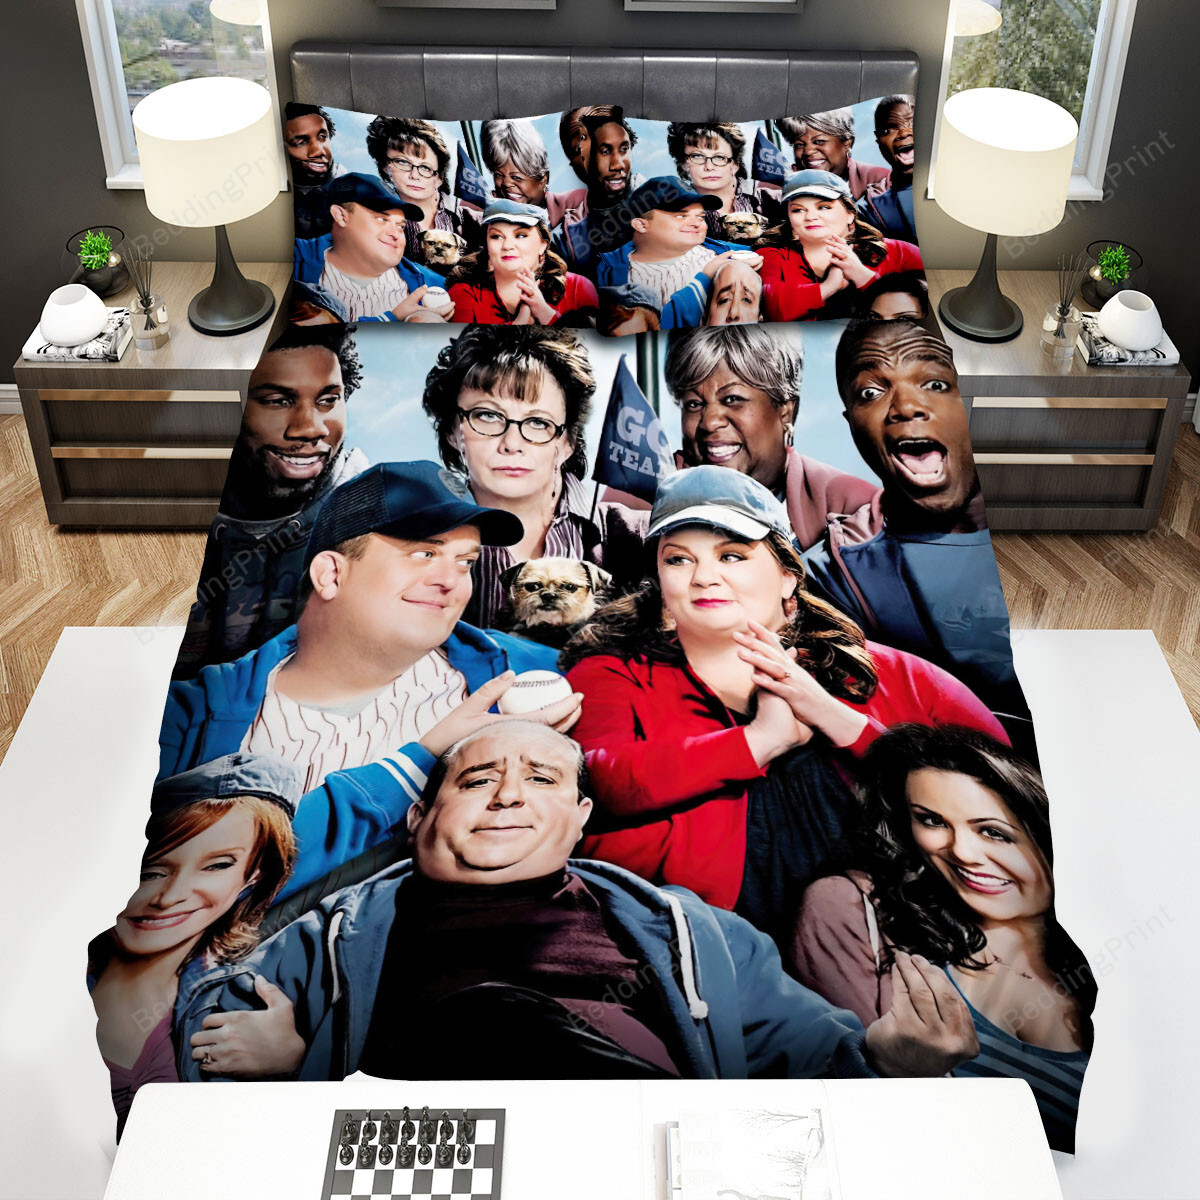 Mike & Molly Movie Poster 5 Bed Sheets Spread Comforter Duvet Cover Bedding Sets